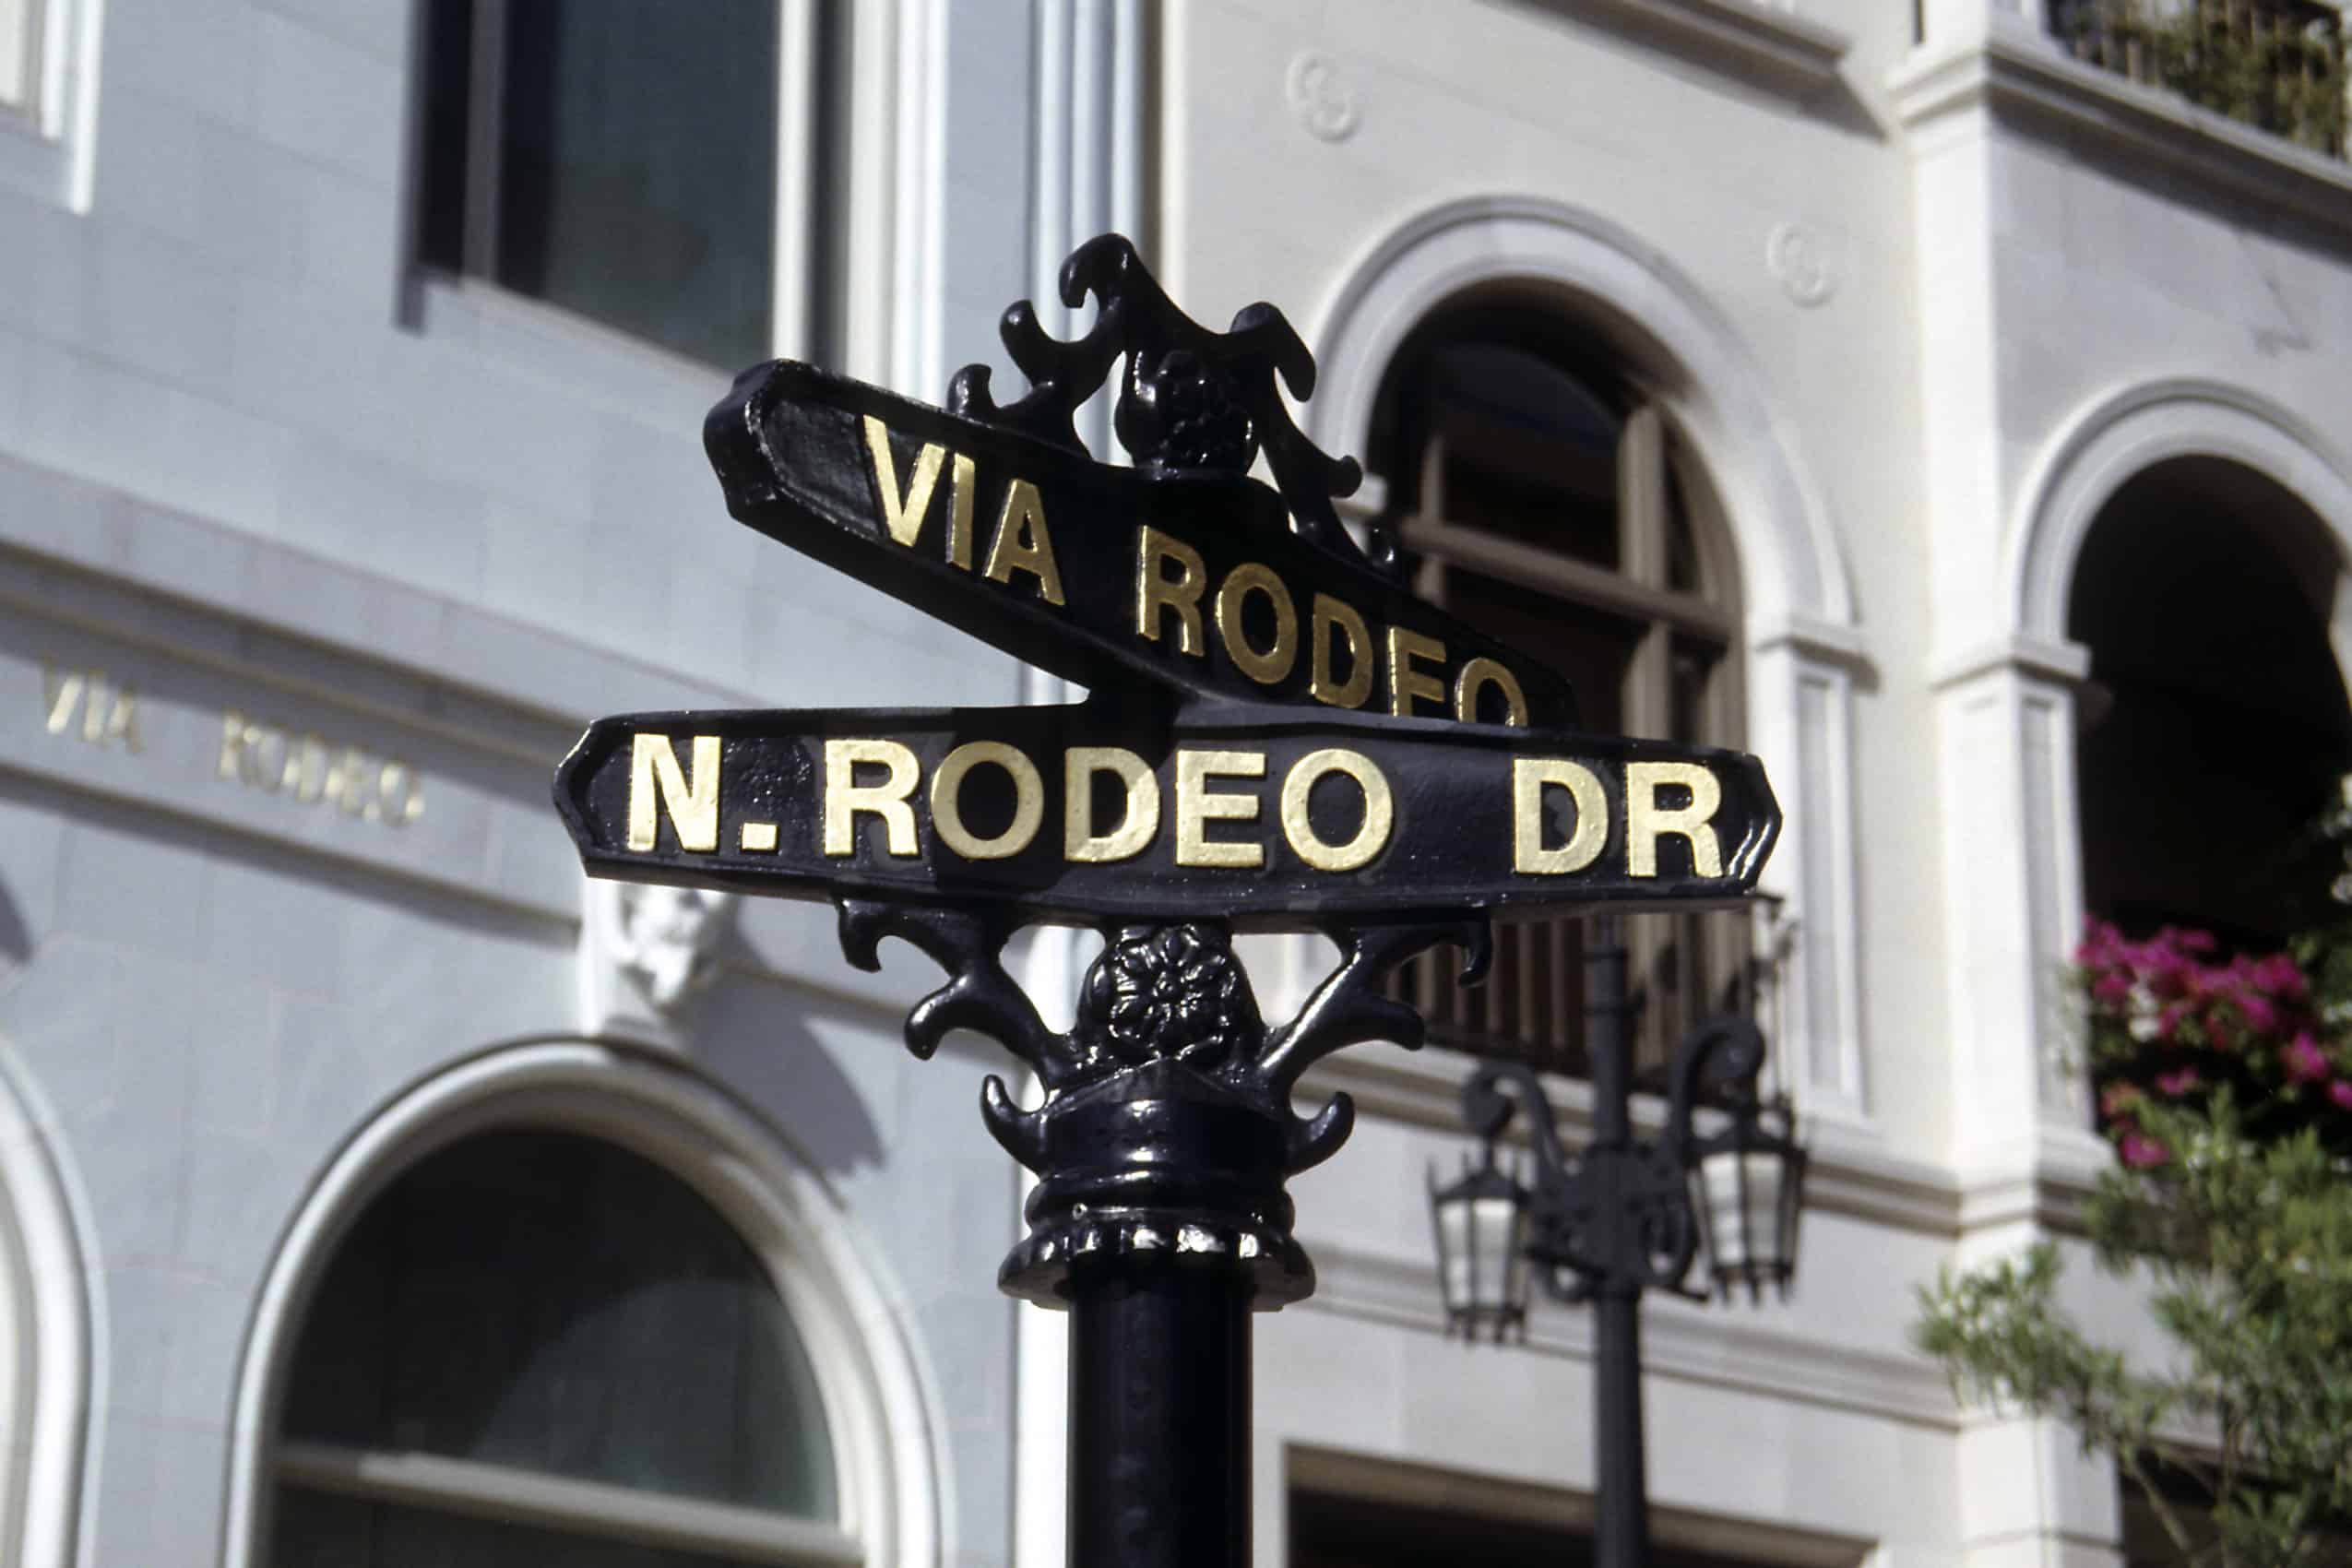 Beverly-Hills-Golden-Triangle-Rodeo-Dr-Beverly-Dr-Luxury-Shopping-Hollywood-life-Beverly-Hills-Magazine-Jacqueline-Maddison